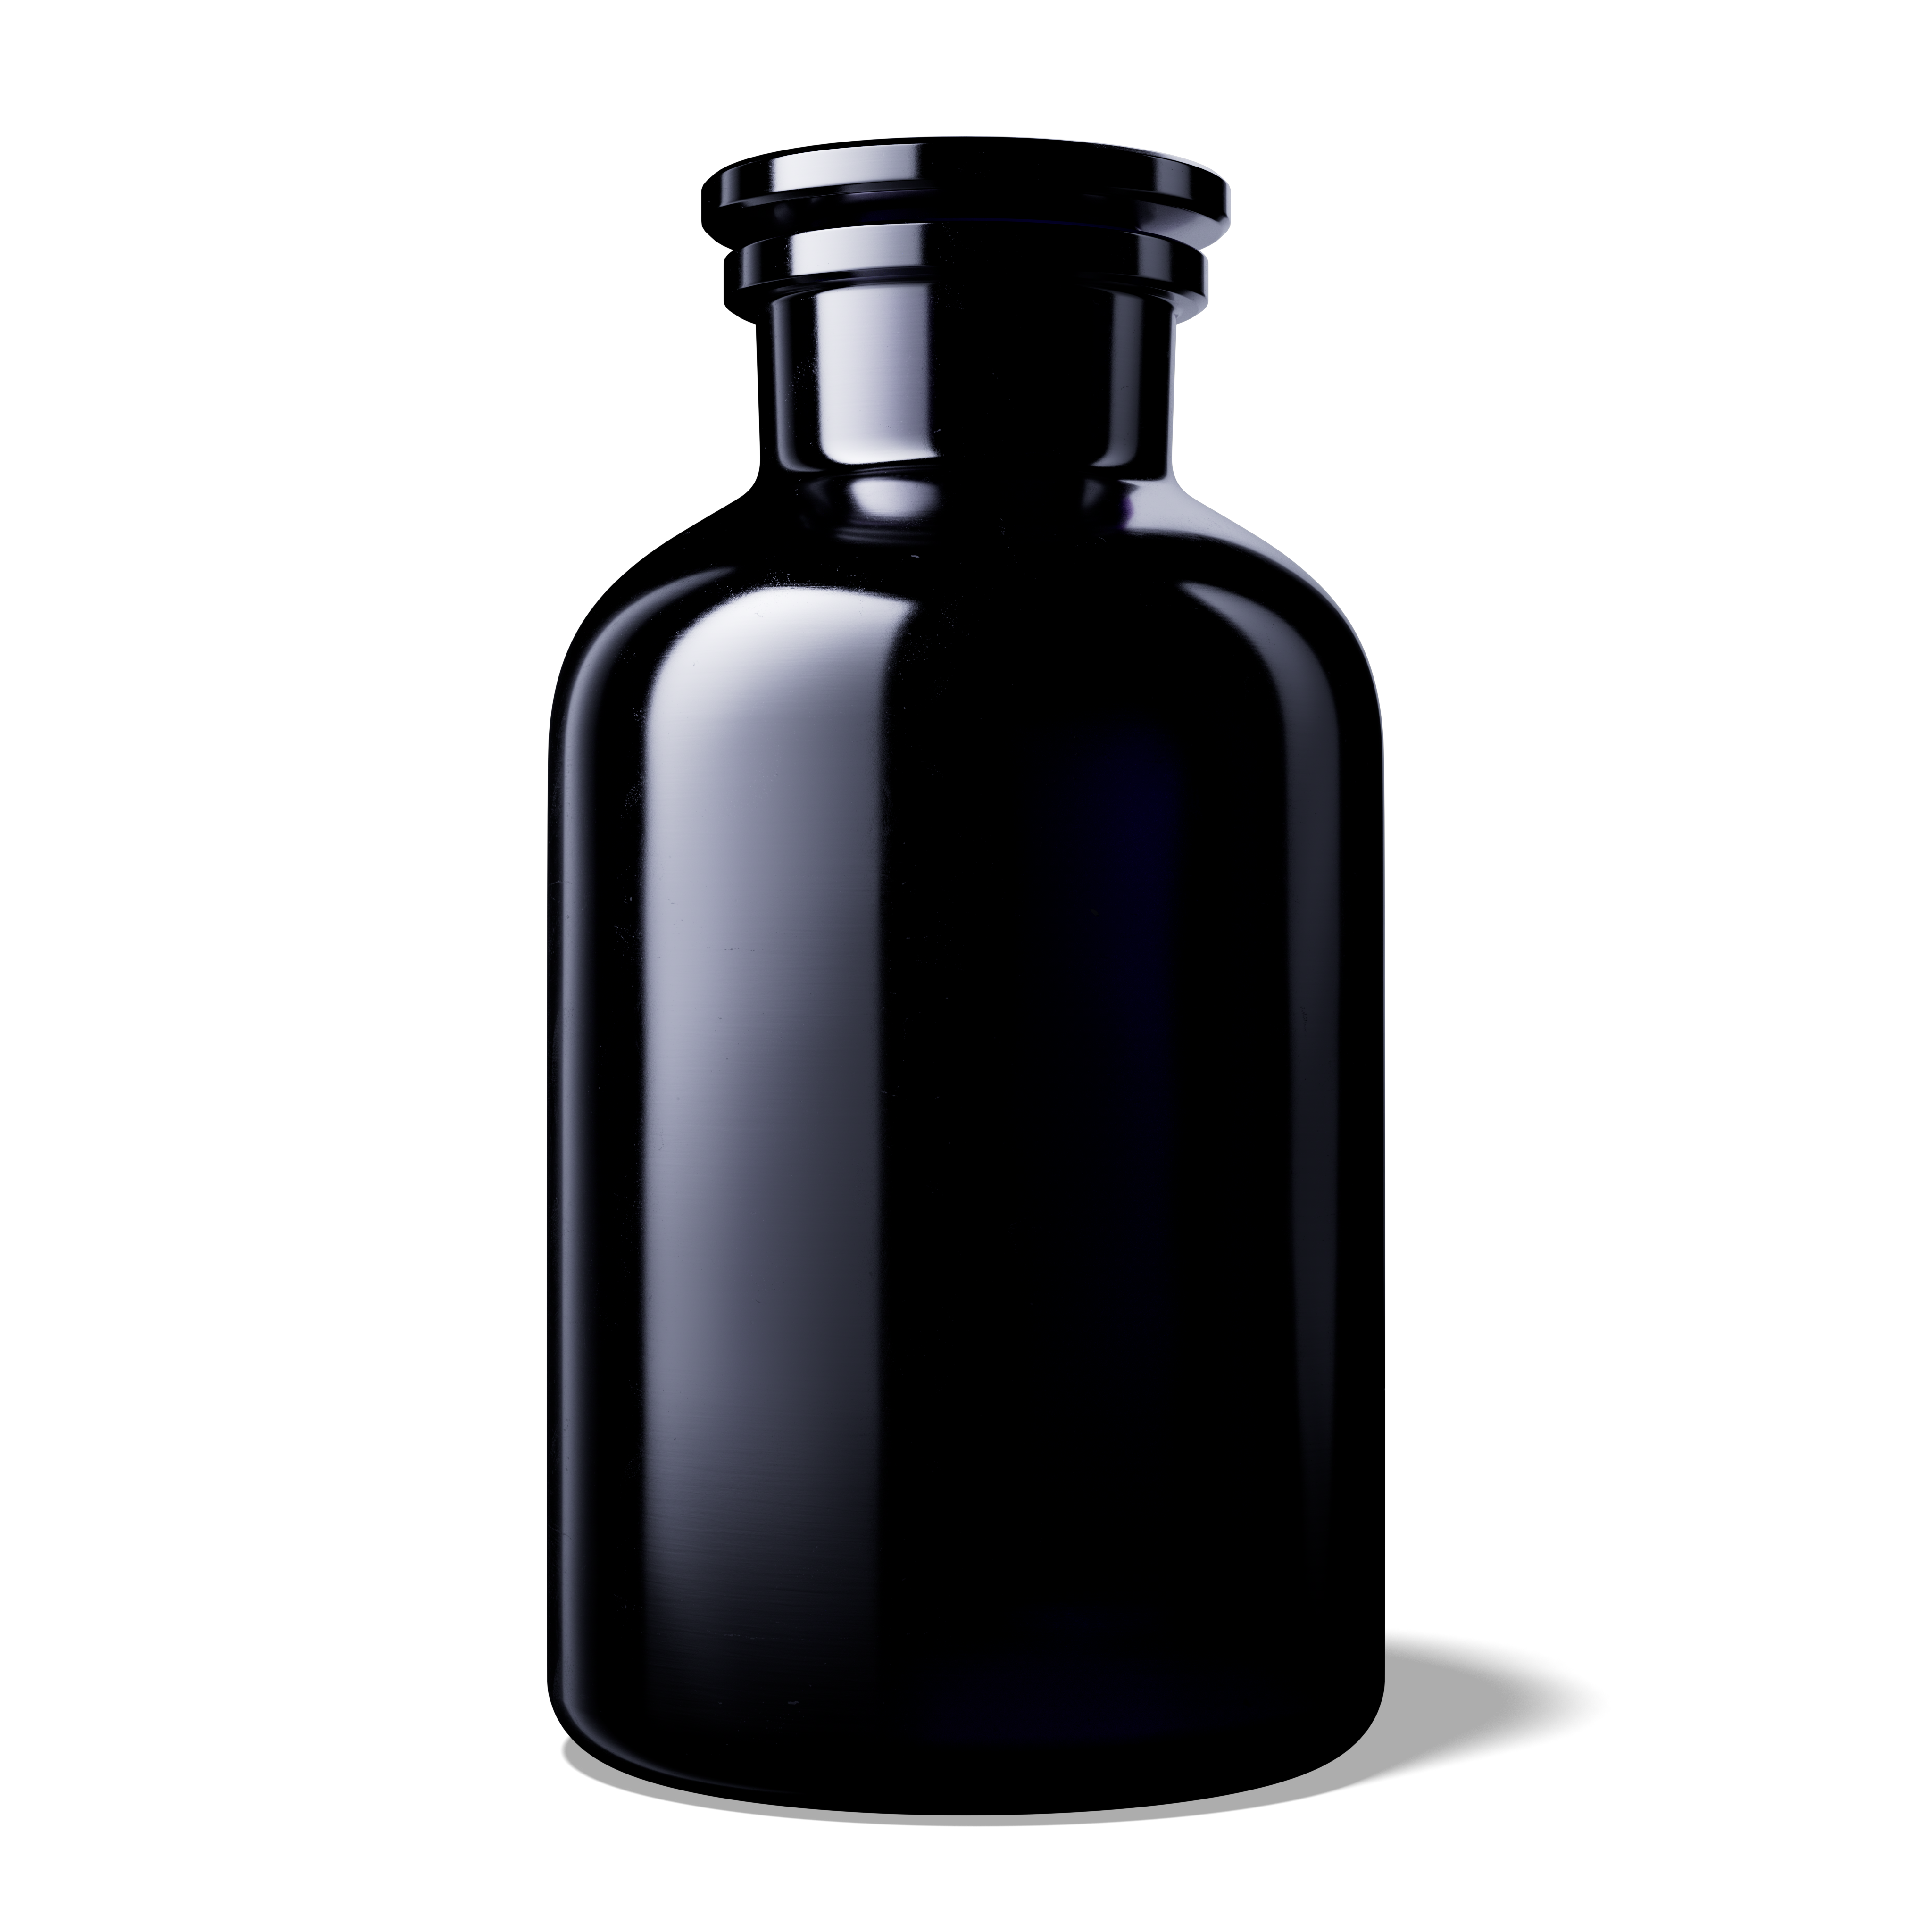 Apothecary jar Libra 2000ml, glass stopper, Miron (we advise to rinse out the bottle before use)  